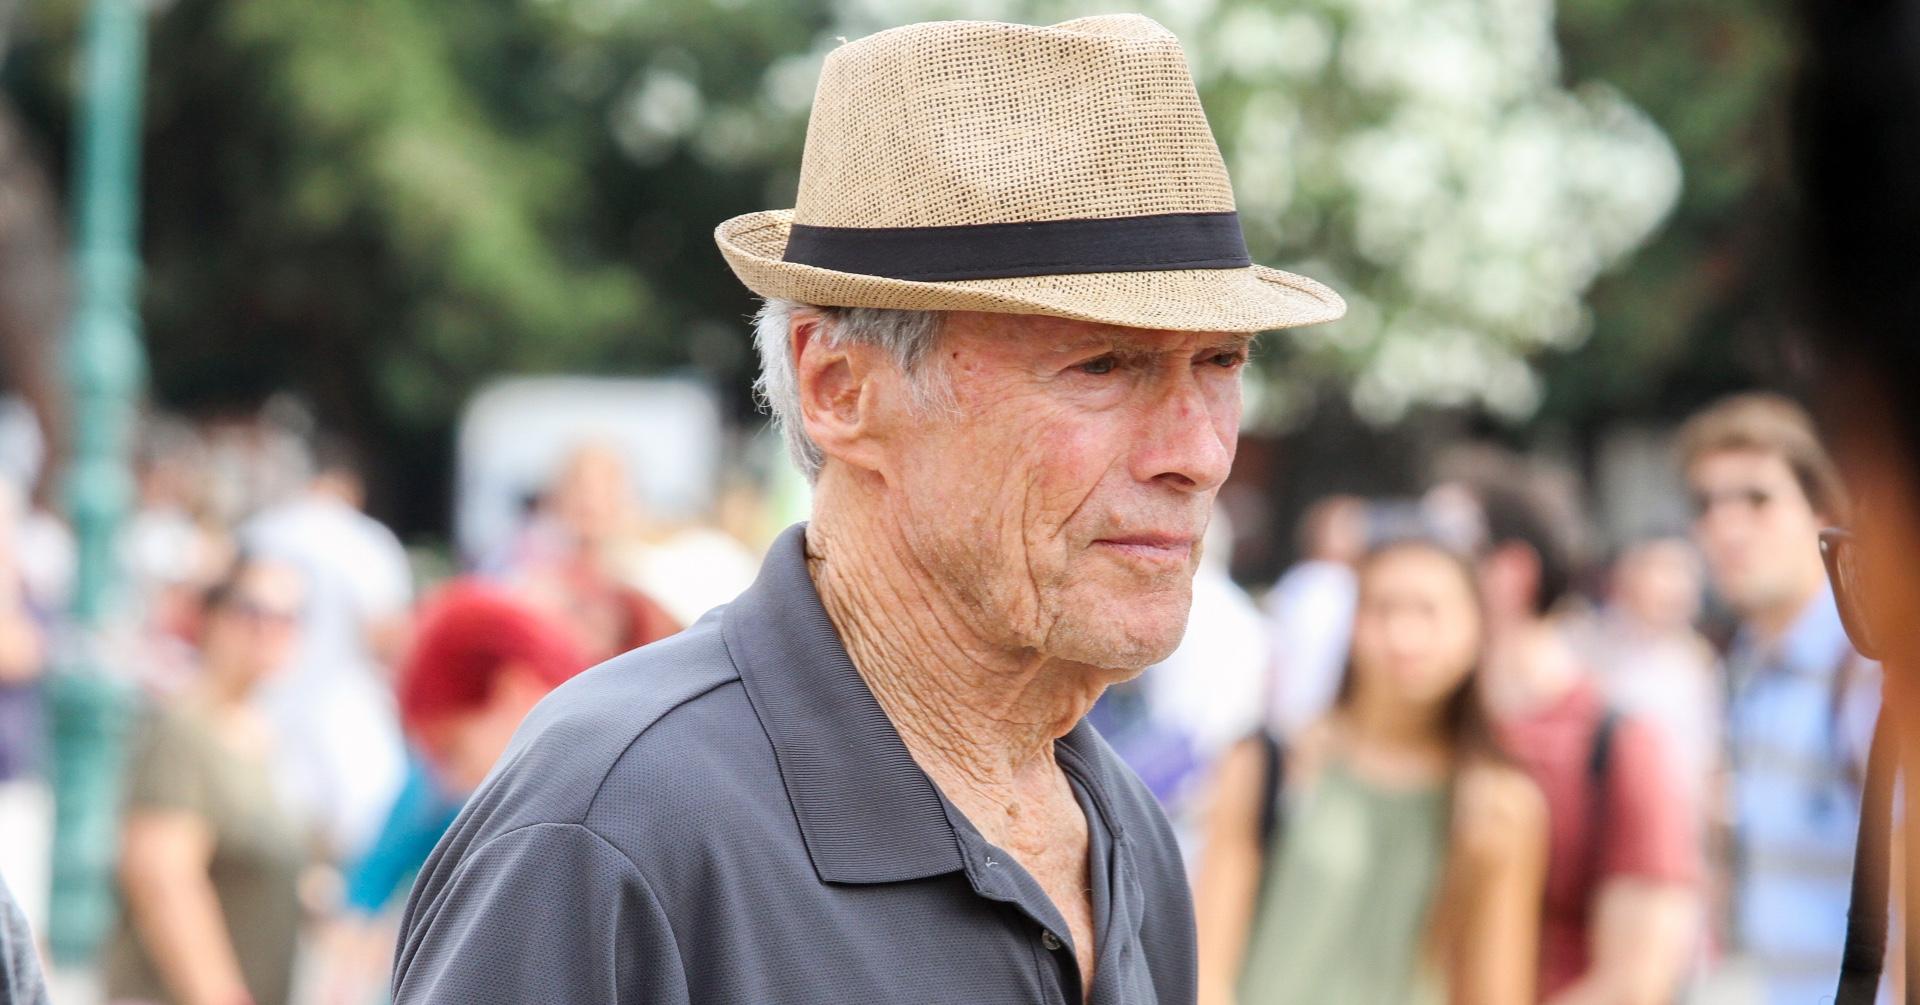 Clint Eastwood is making a JoJo pose, your argument is invalid